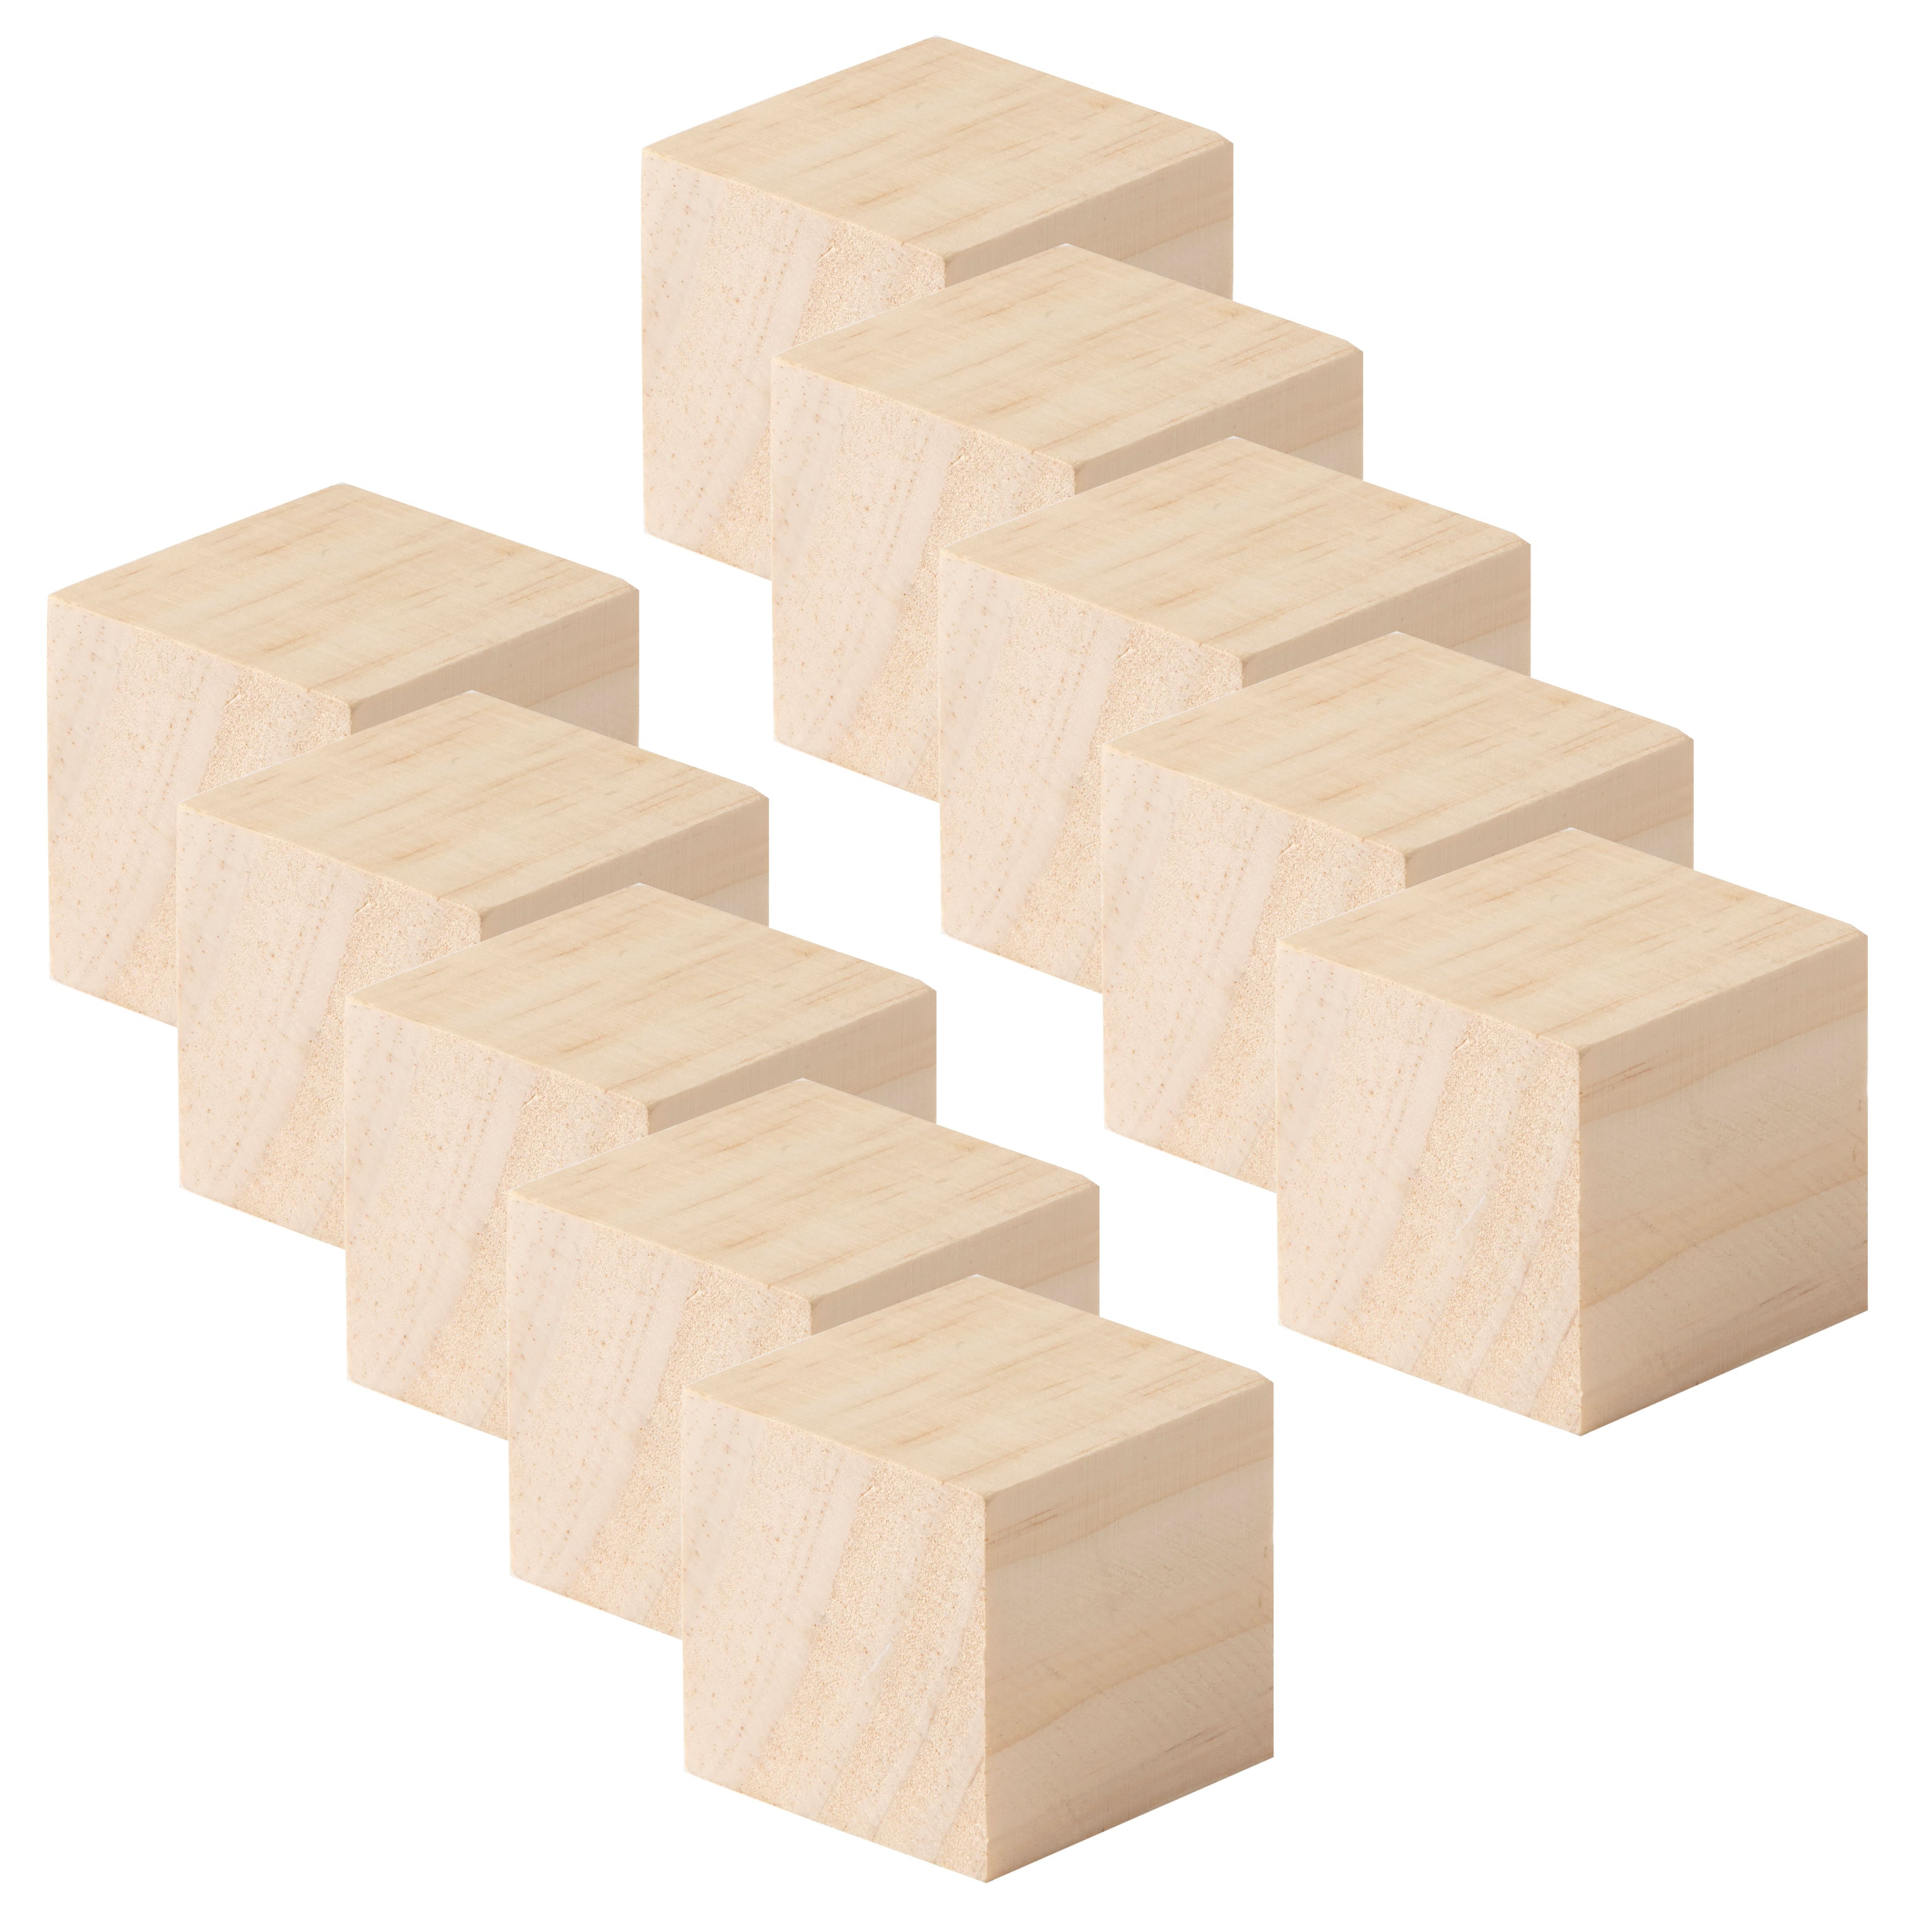 Unfinished Wood Craft Cubes 1-1/2 inch, Pack of 36 Small Wooden Blocks to Decorate, Wooden Cubes for Crafts and Dcor, by Woodpeckers